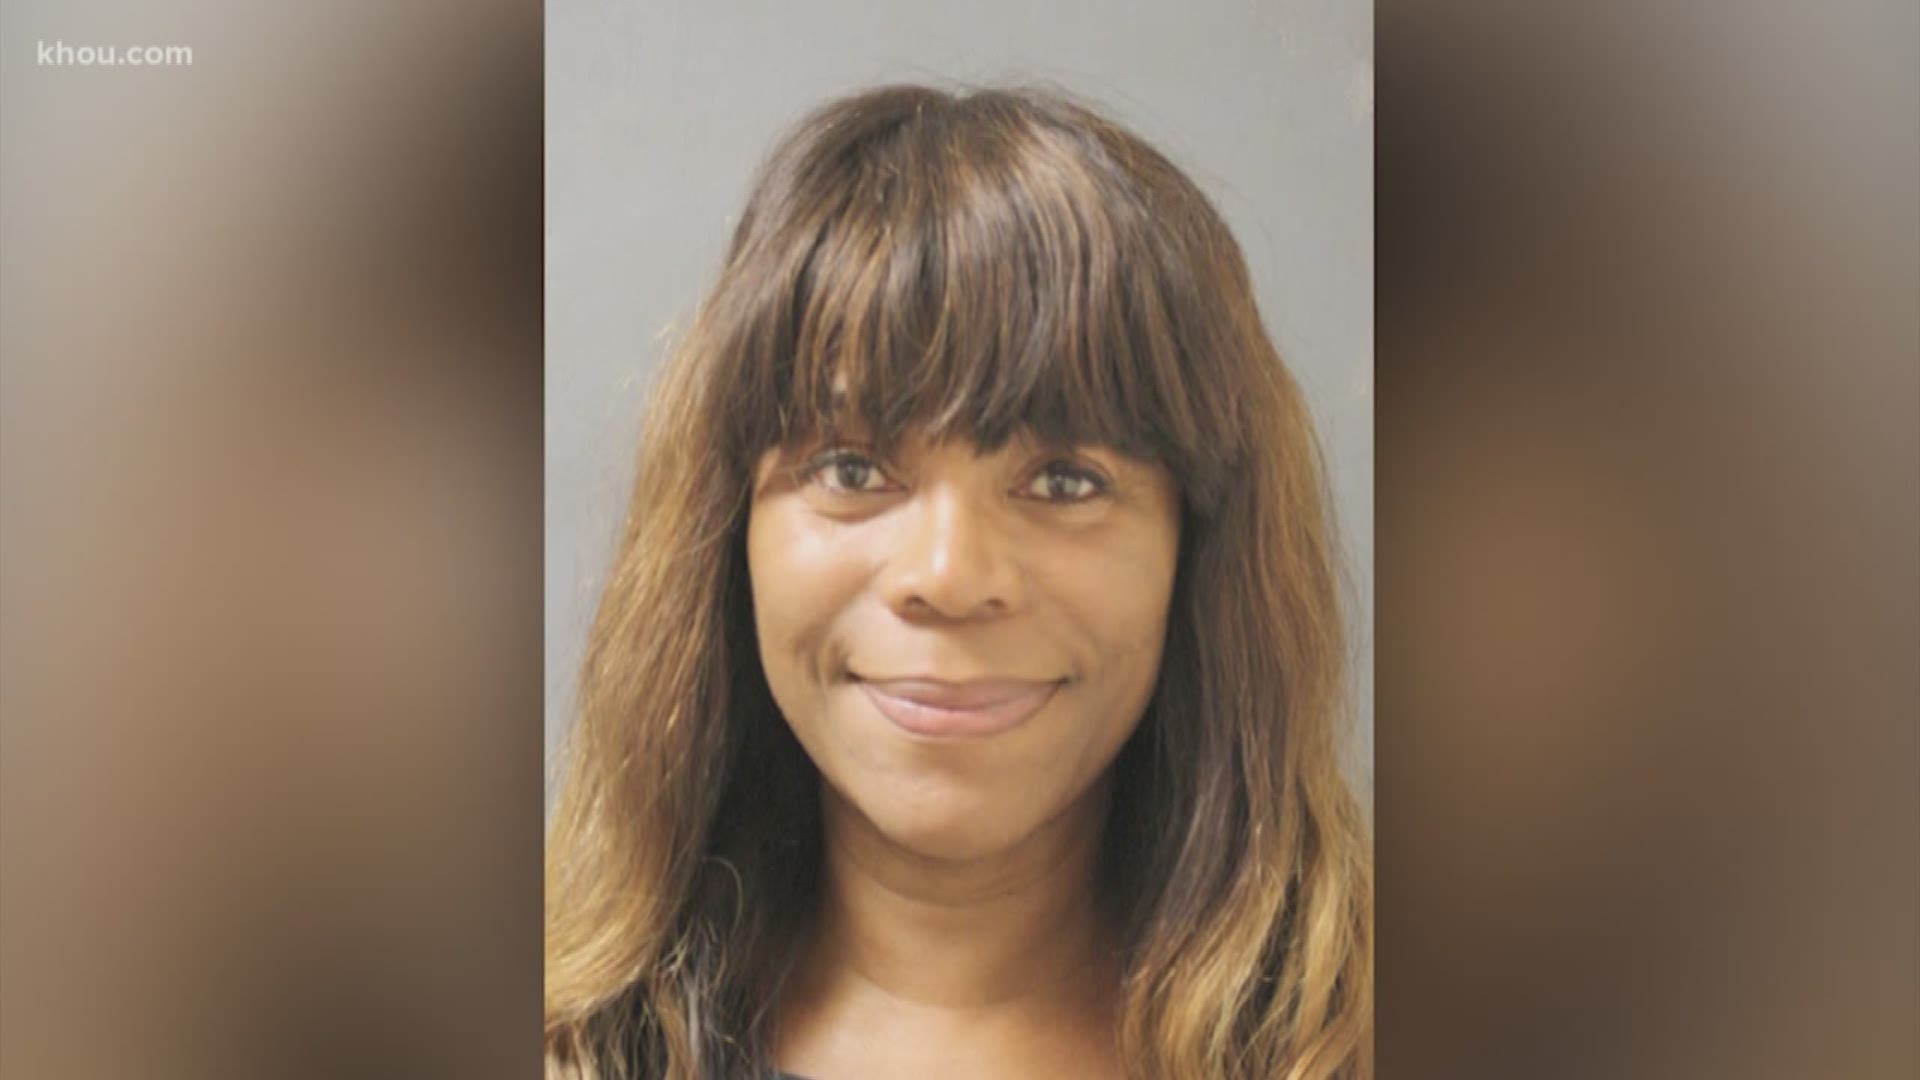 Darian Ward, a former press secretary for Mayor Sylvester Turner, faces a new charge involving her time with the mayor's office.